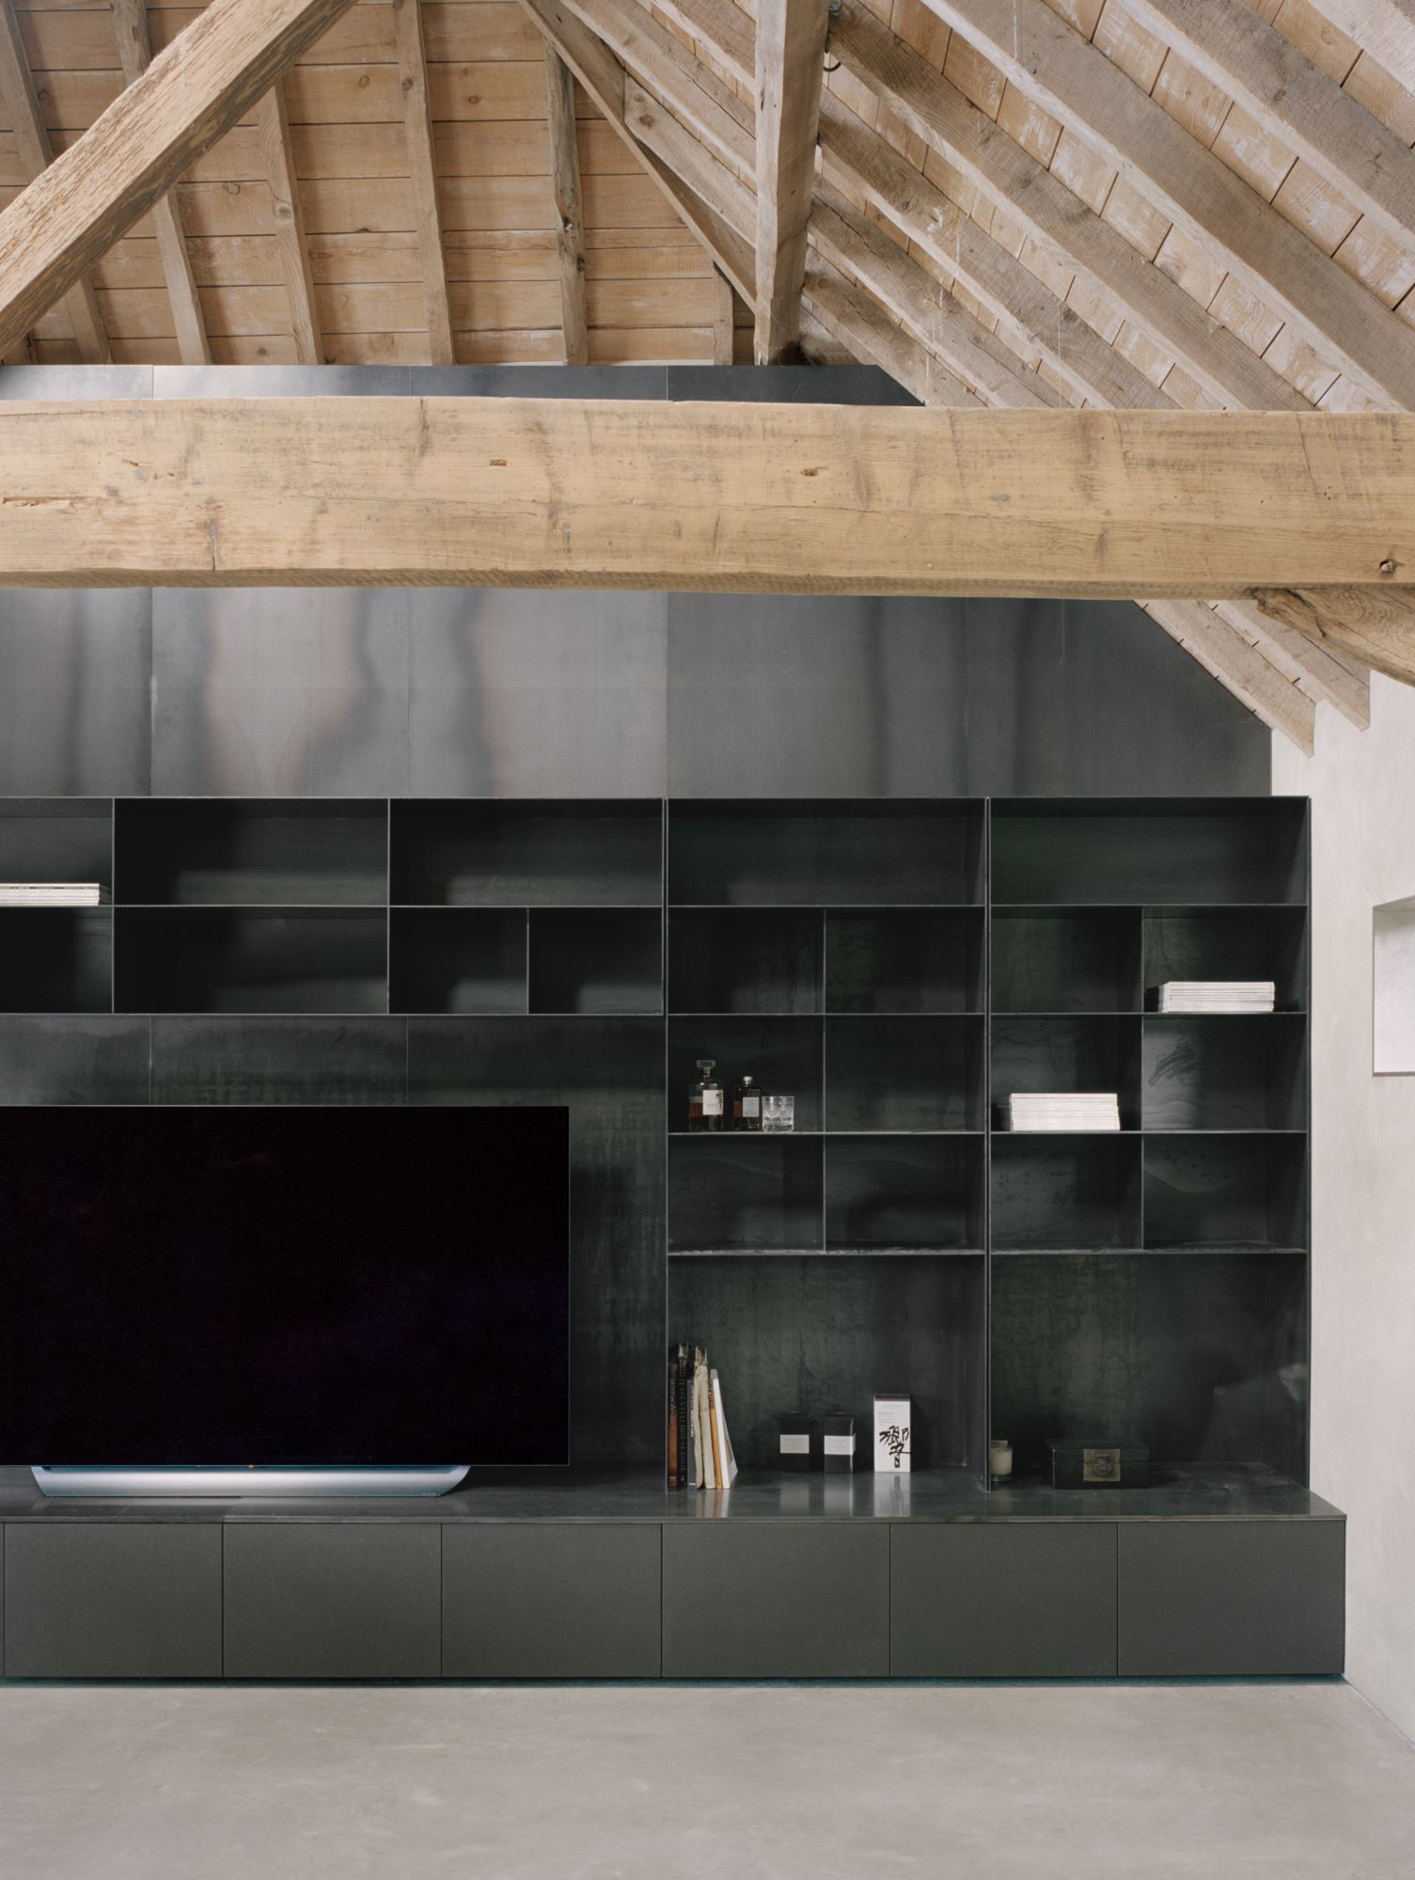 The union of old and new is echoed by the visual contrast between black and wooden elements